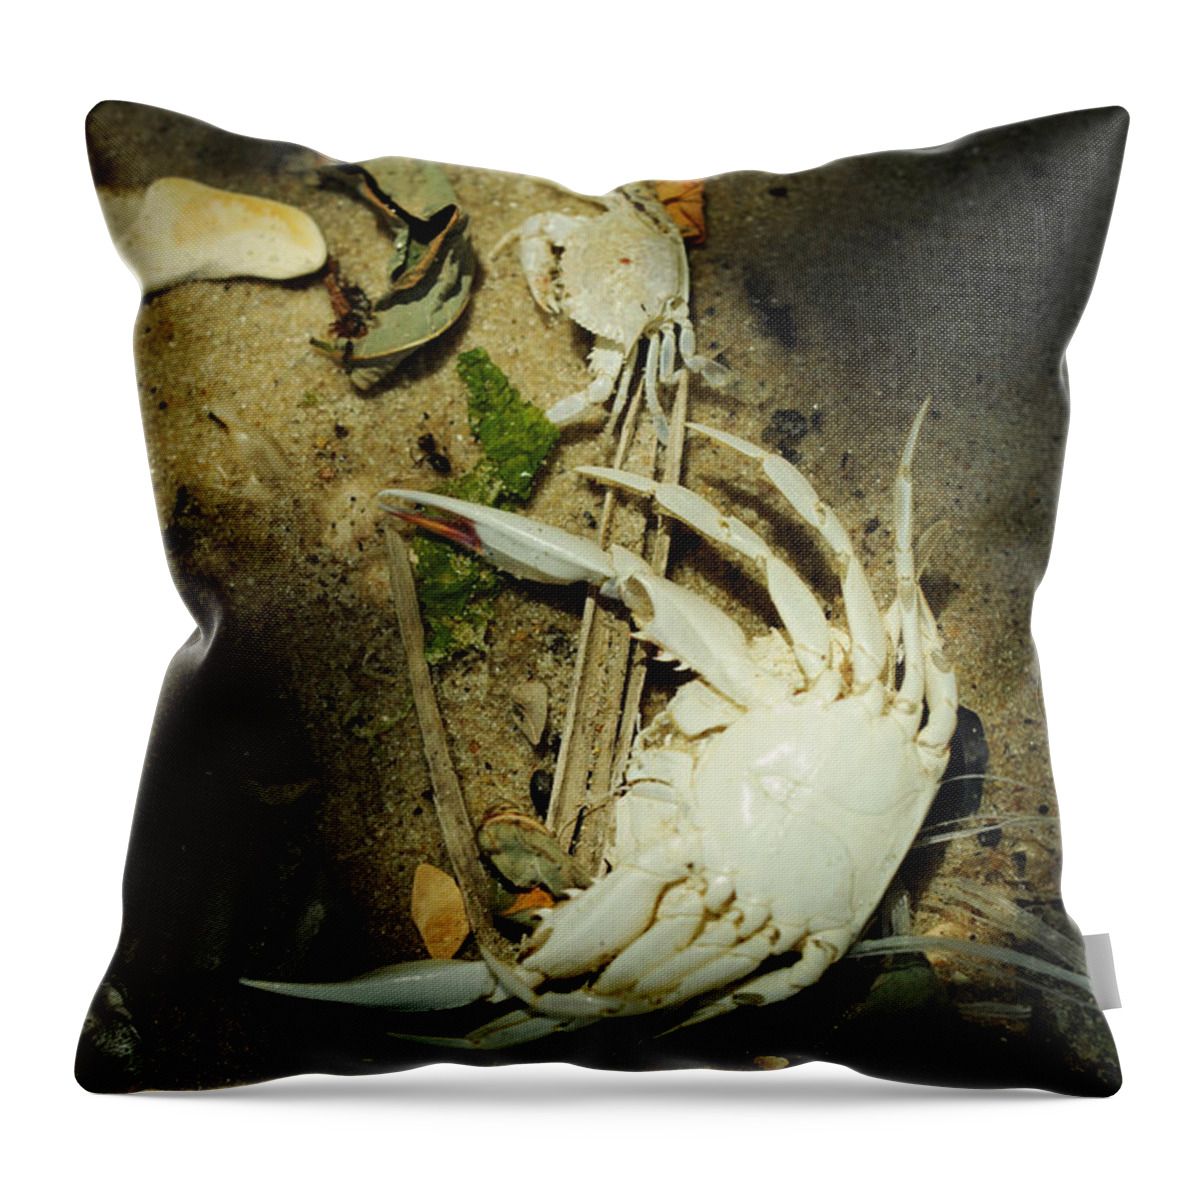 Blue Crab Throw Pillow featuring the photograph A Time to Shed by Rebecca Sherman